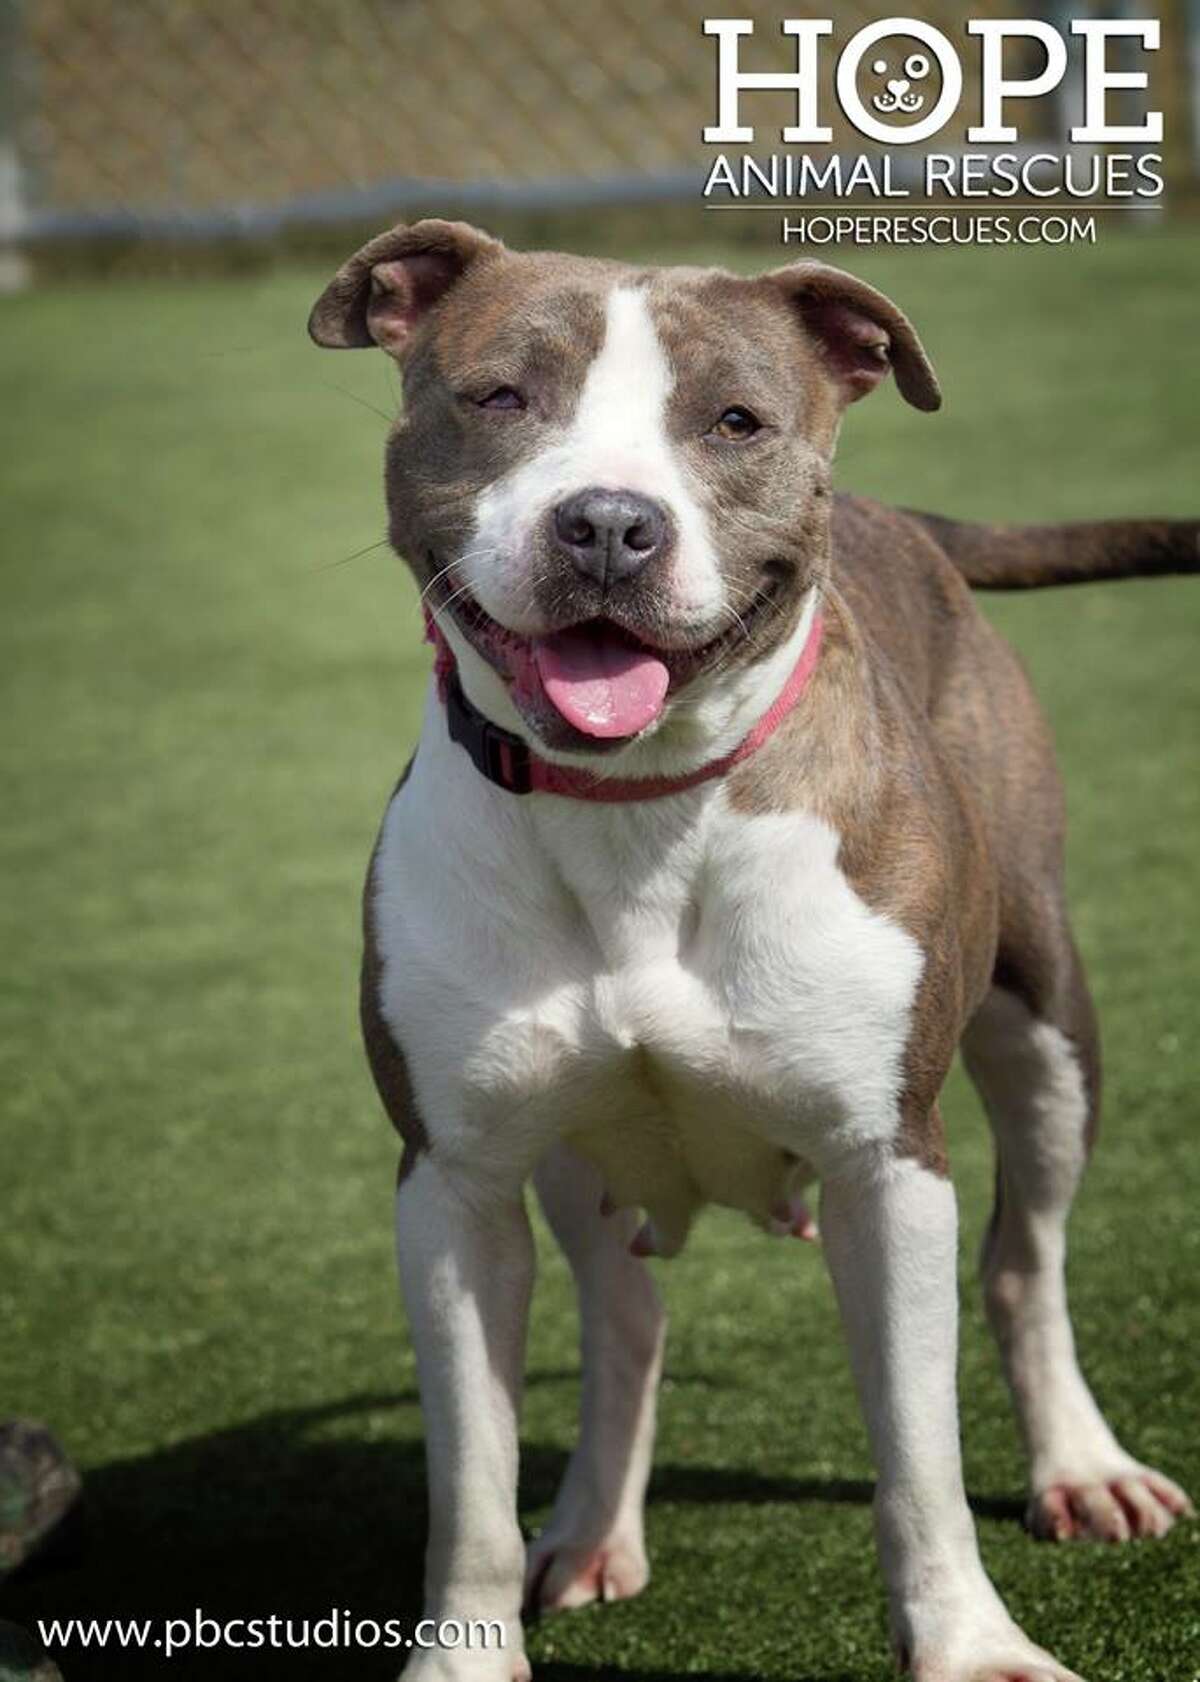 London, a 7-year-old American Staffordshire terrier, is a sweet dog at Hope Rescues looking for a loving home. An approved application is needed to meet Hope Rescues’ dogs and you can apply directly at www.hoperescues.org . 